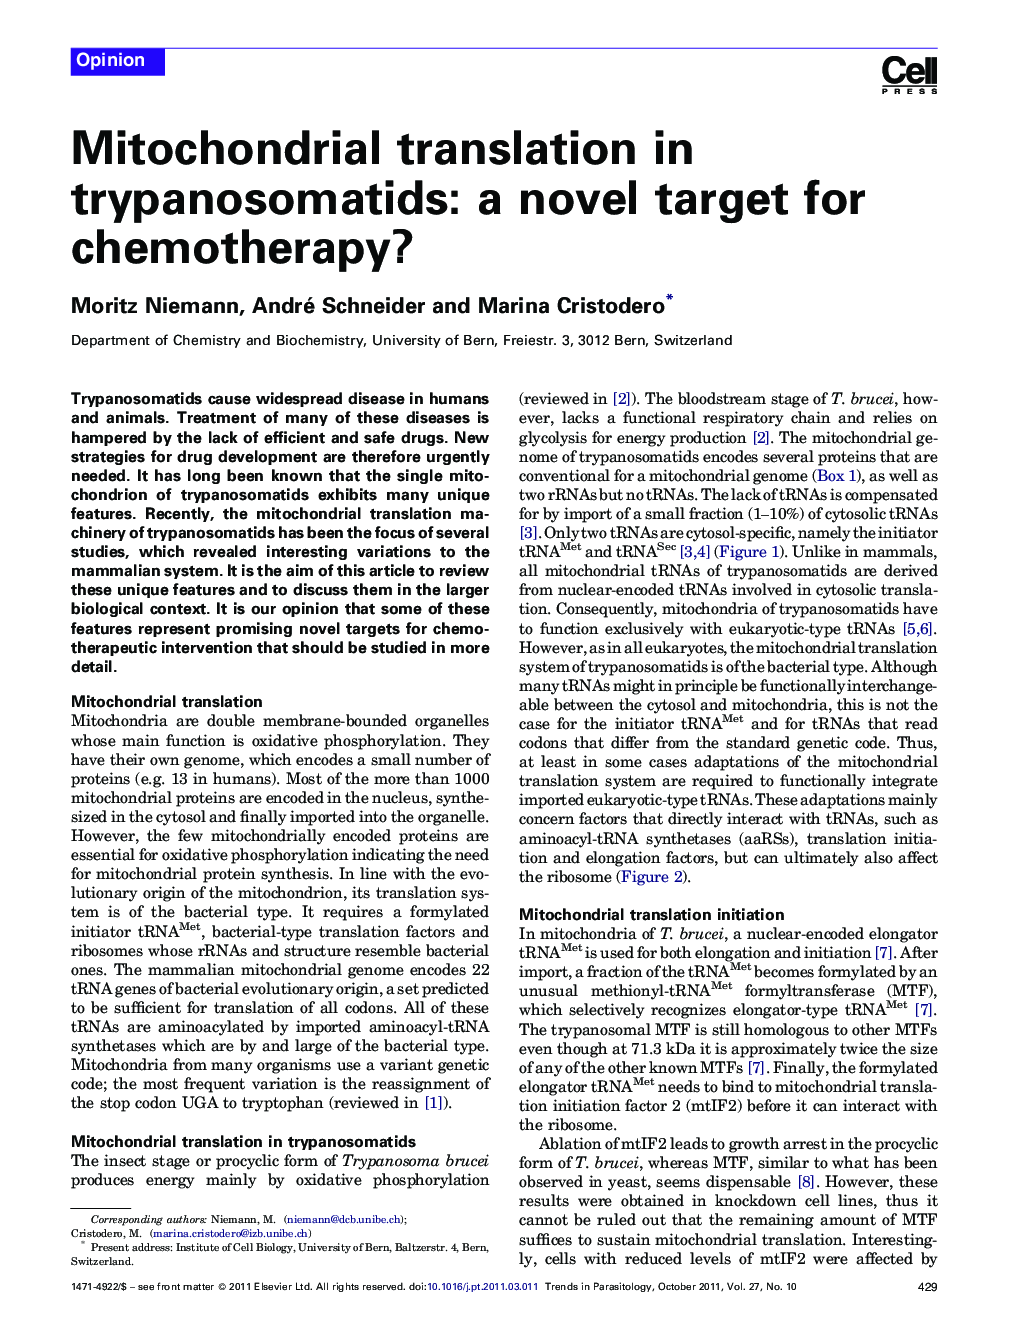 Mitochondrial translation in trypanosomatids: a novel target for chemotherapy?